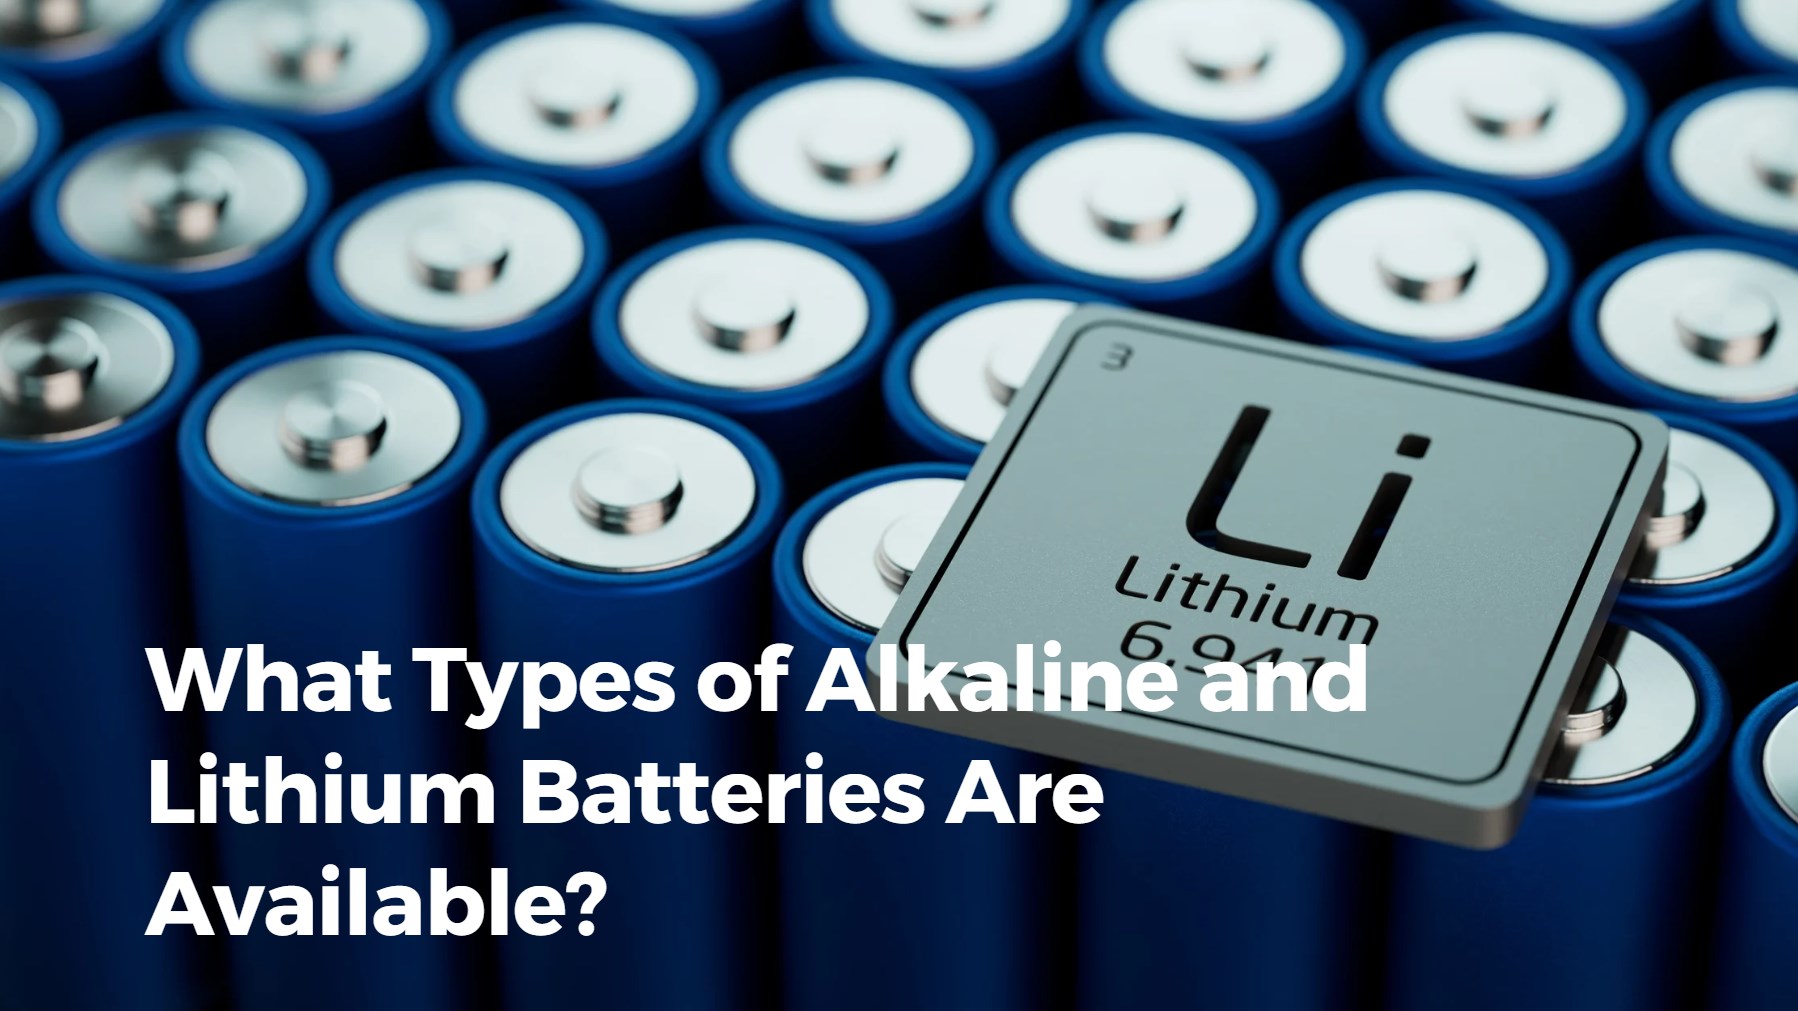 What Types of Alkaline and Lithium Batteries Are Available?